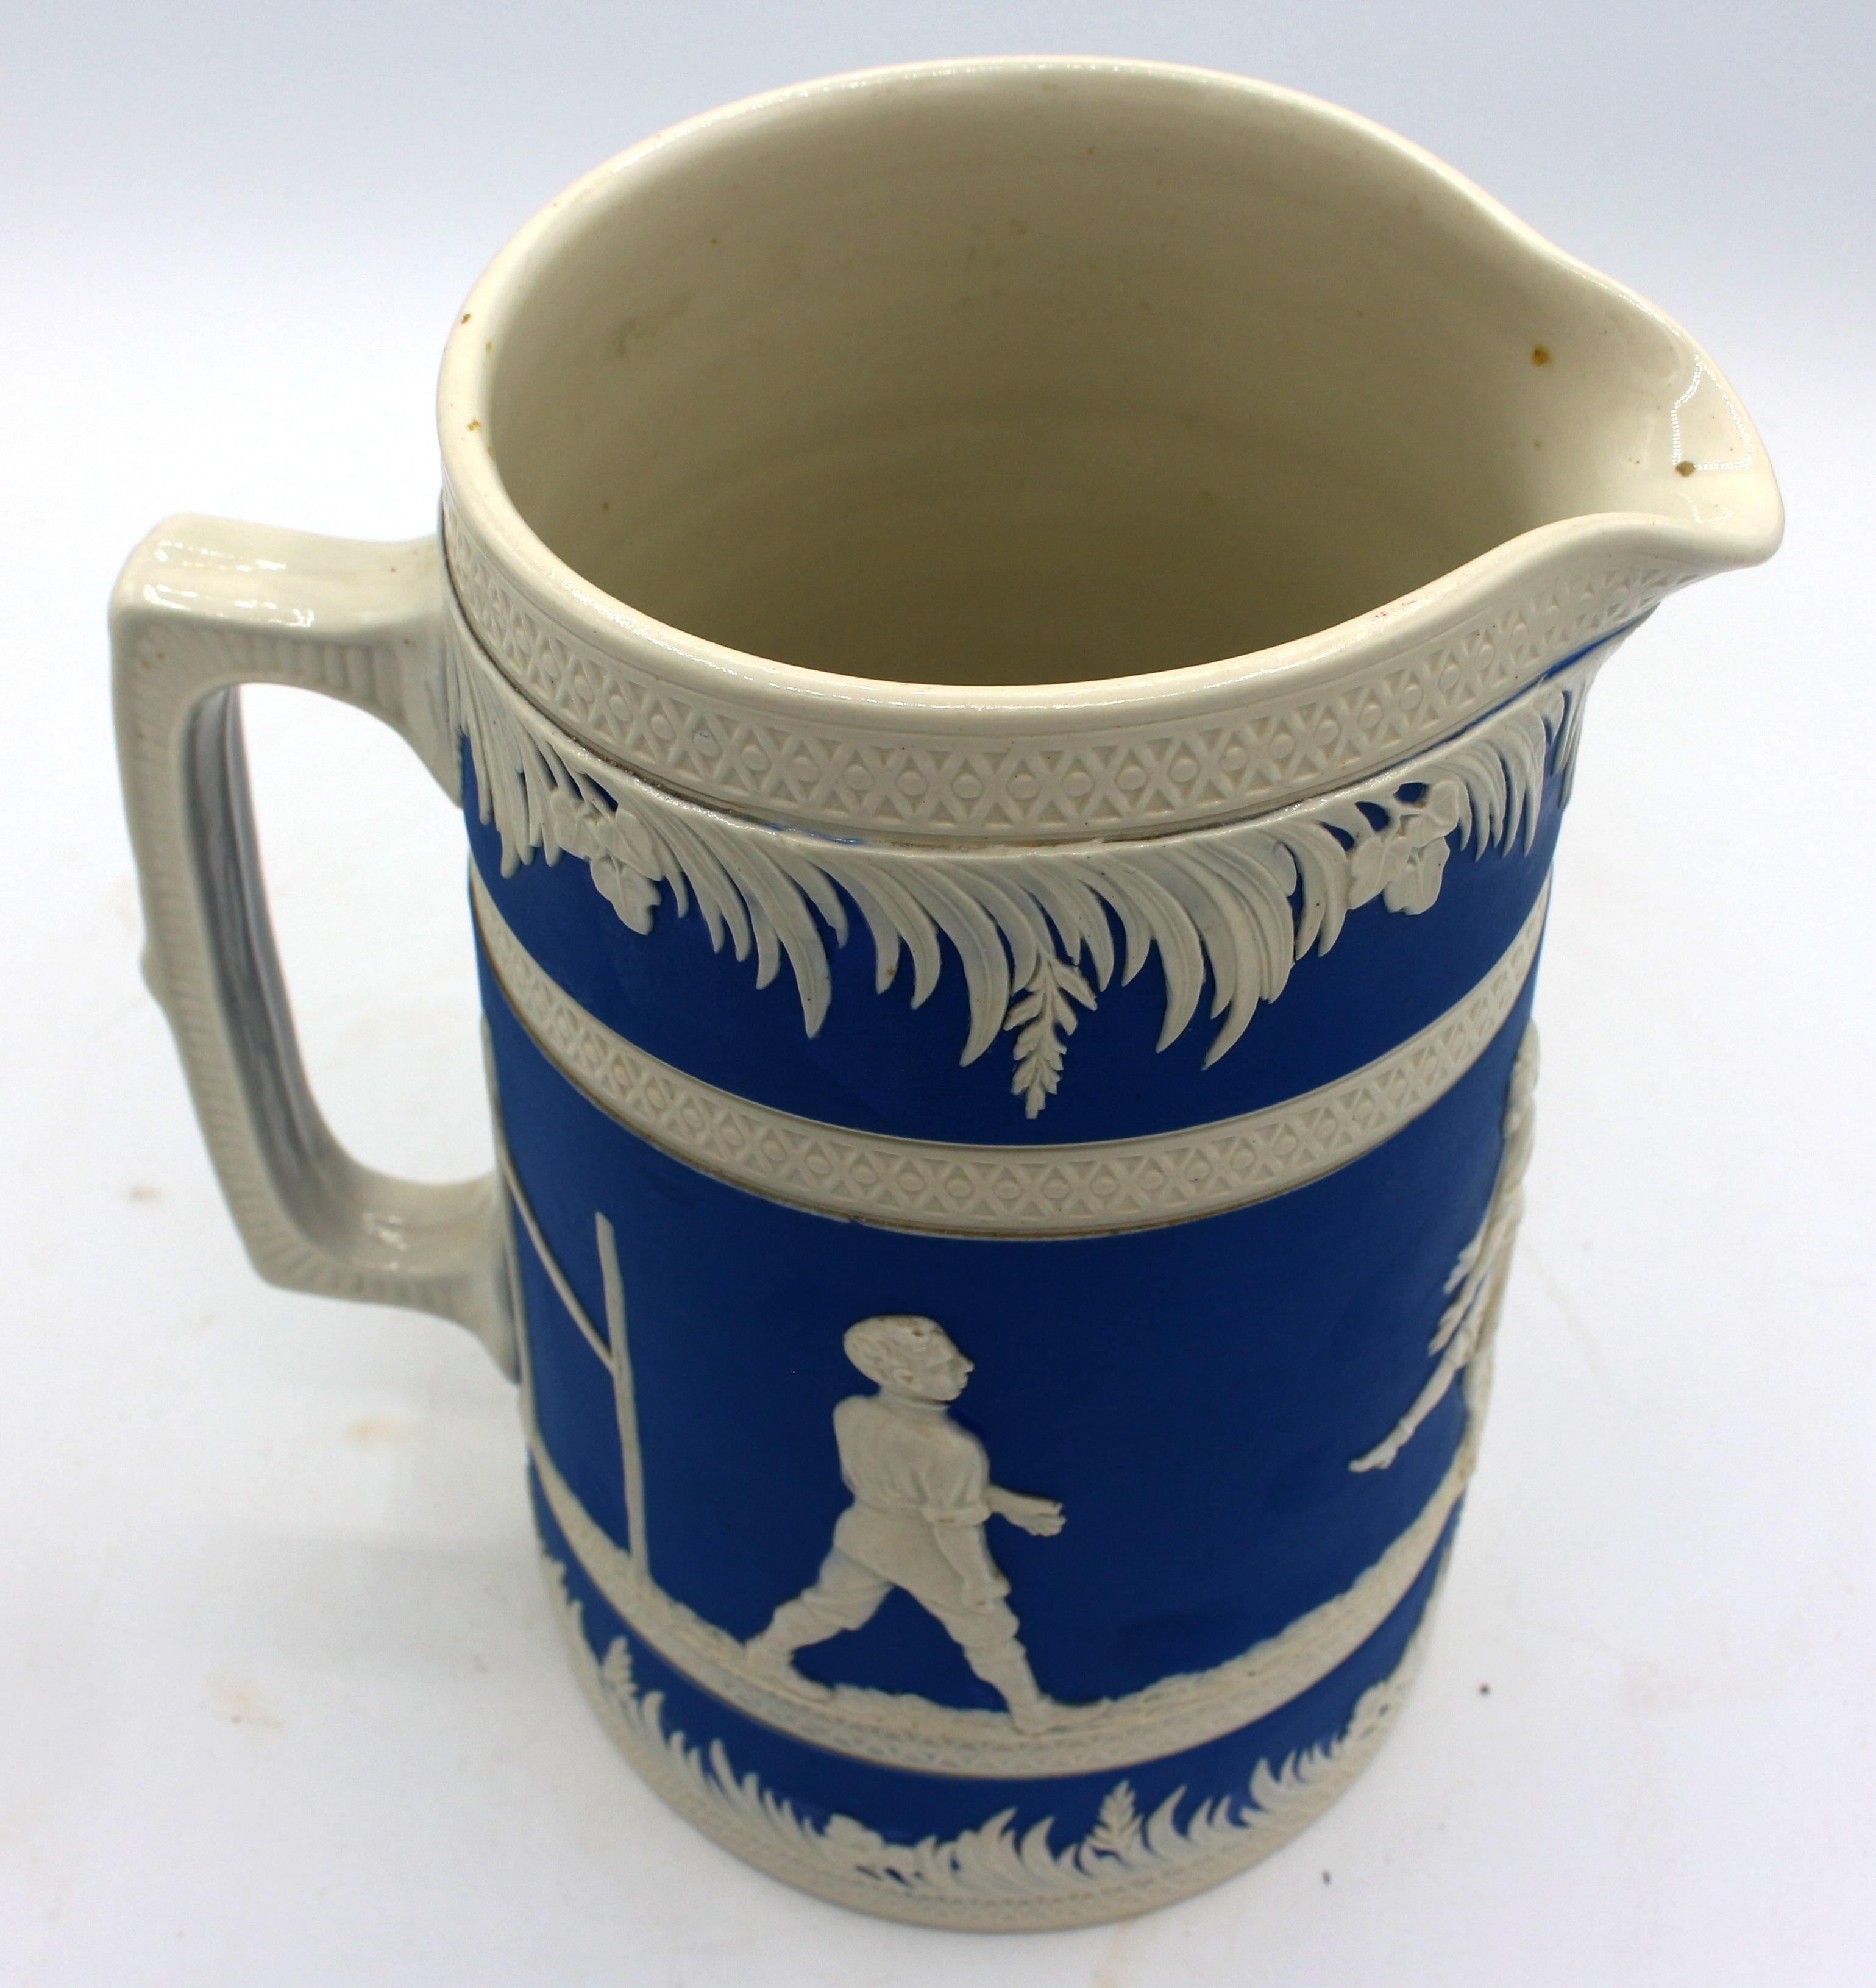 Marked 1895 American Football Motif Ceramic Pitcher by Copeland 1